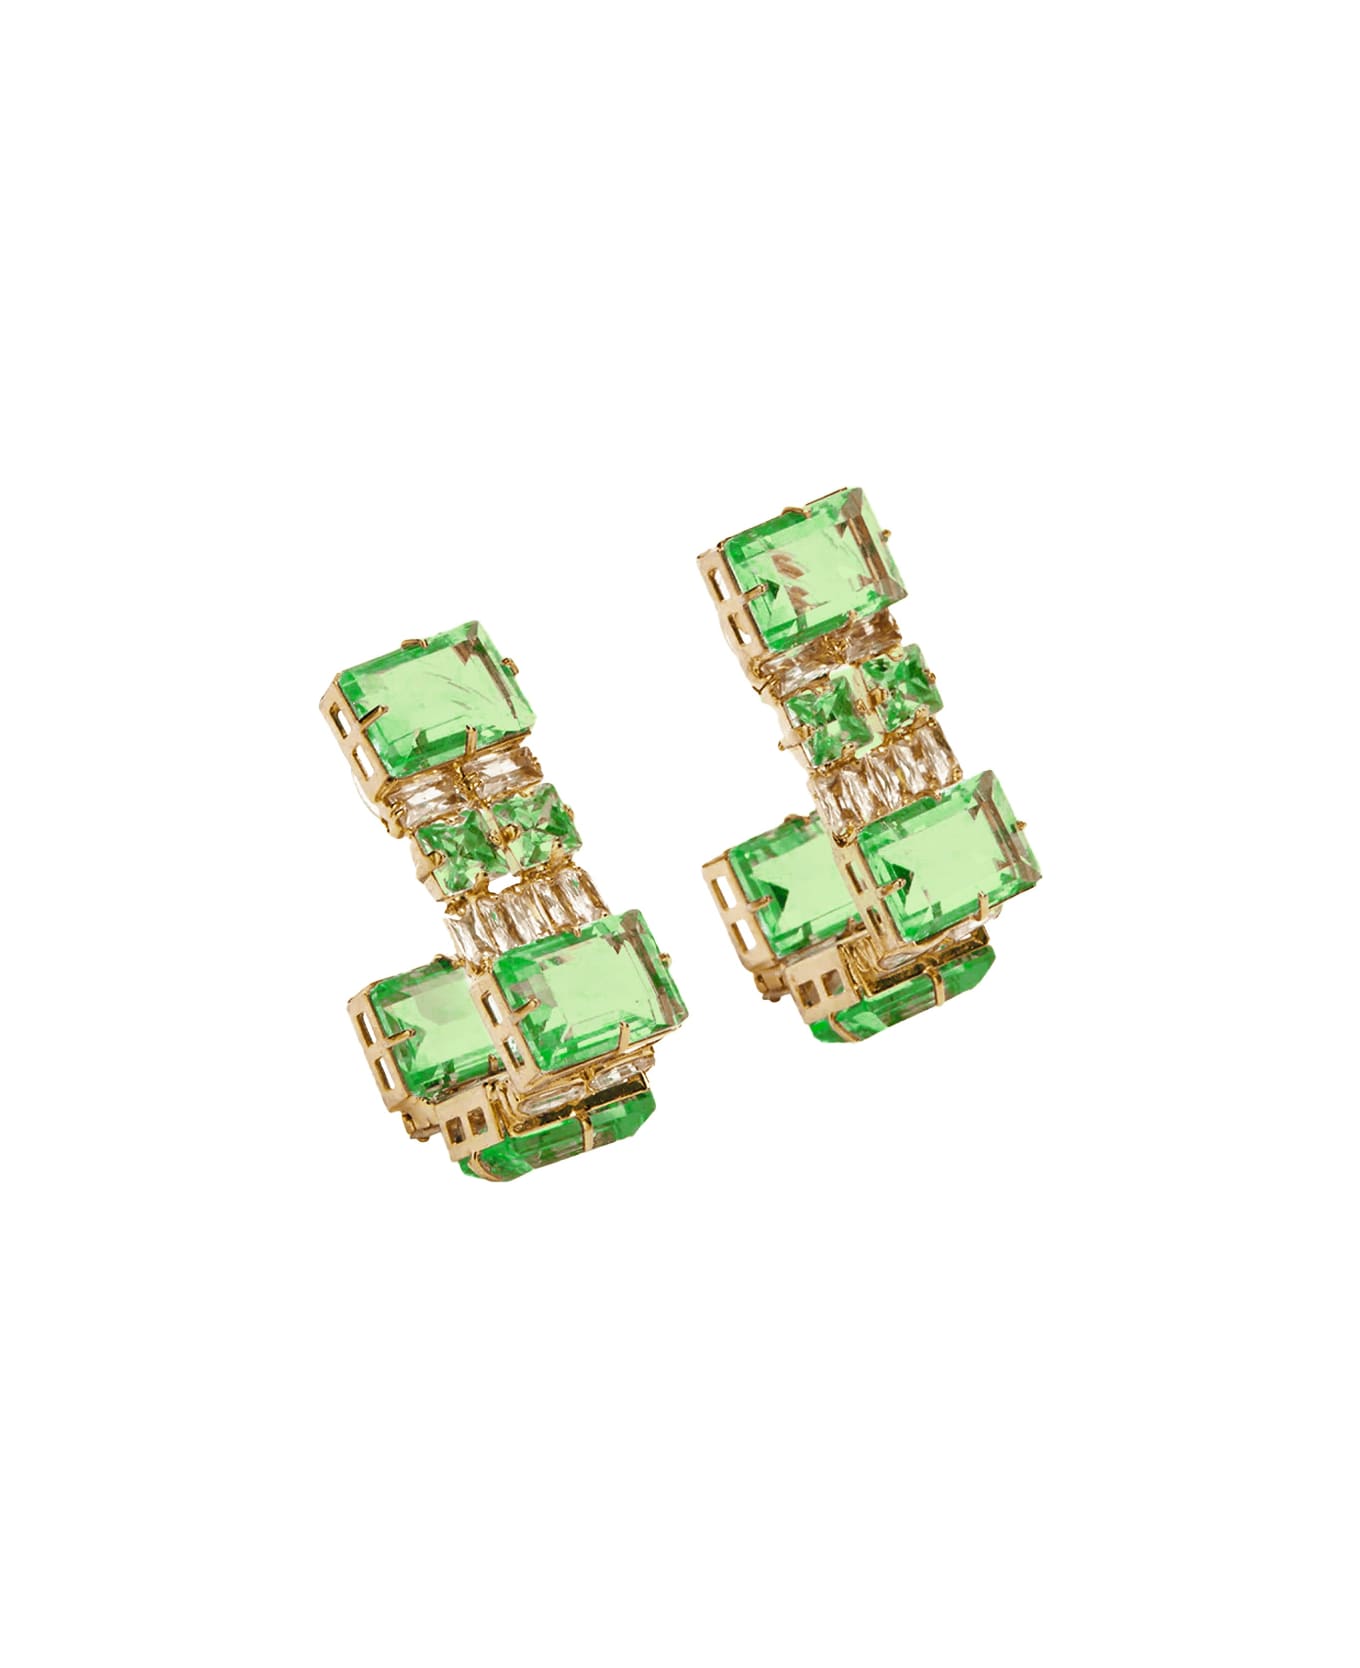 Ermanno Scervino Earrings With Green Stones - Green イヤリング